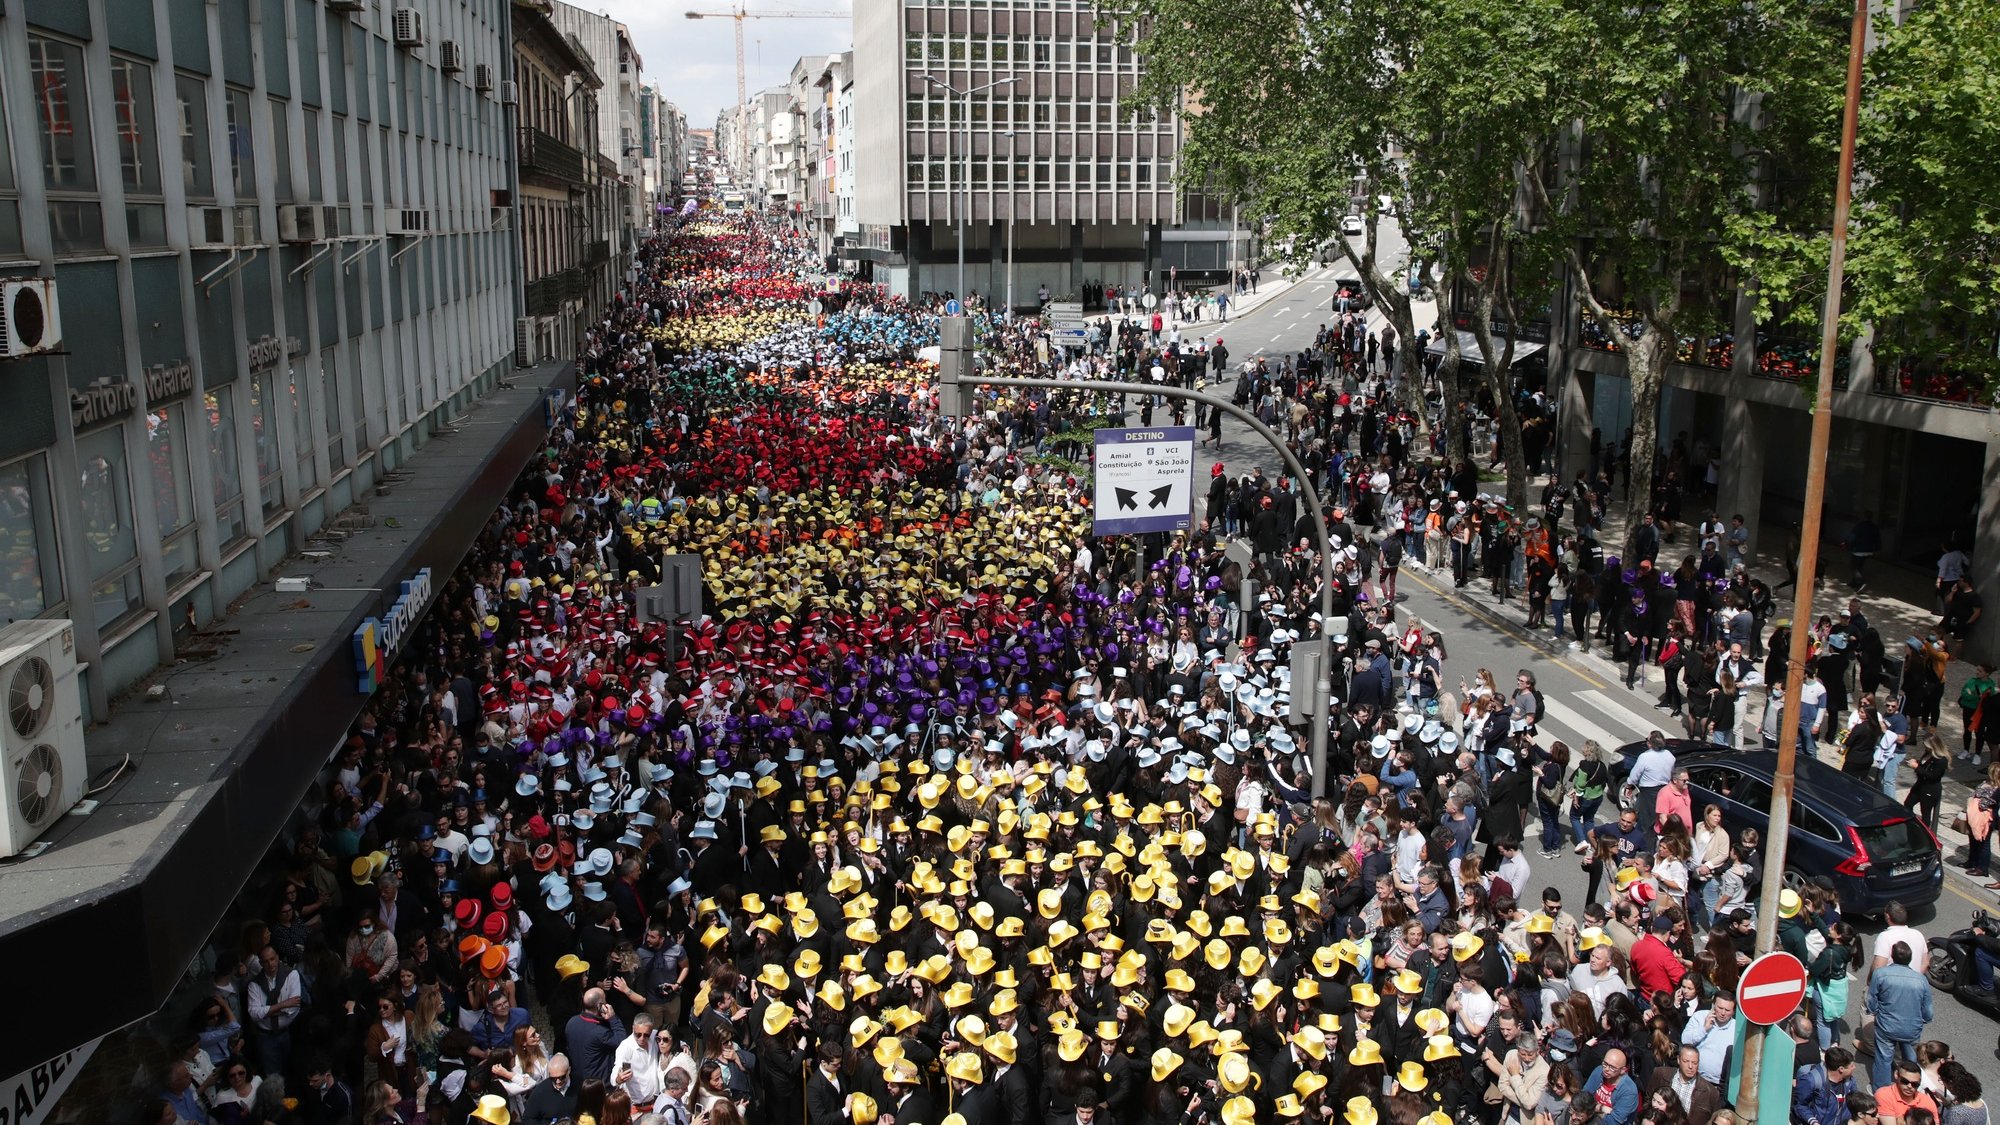 University students attend the procession of graduating academic parade &#039;Queima das Fitas&#039; in Porto, Portugal, 03 May 2022. The event marks, this year, the 100th edition after being suspended for two years because of the covid-19 pandemic. ESTELA SILVA/LUSA